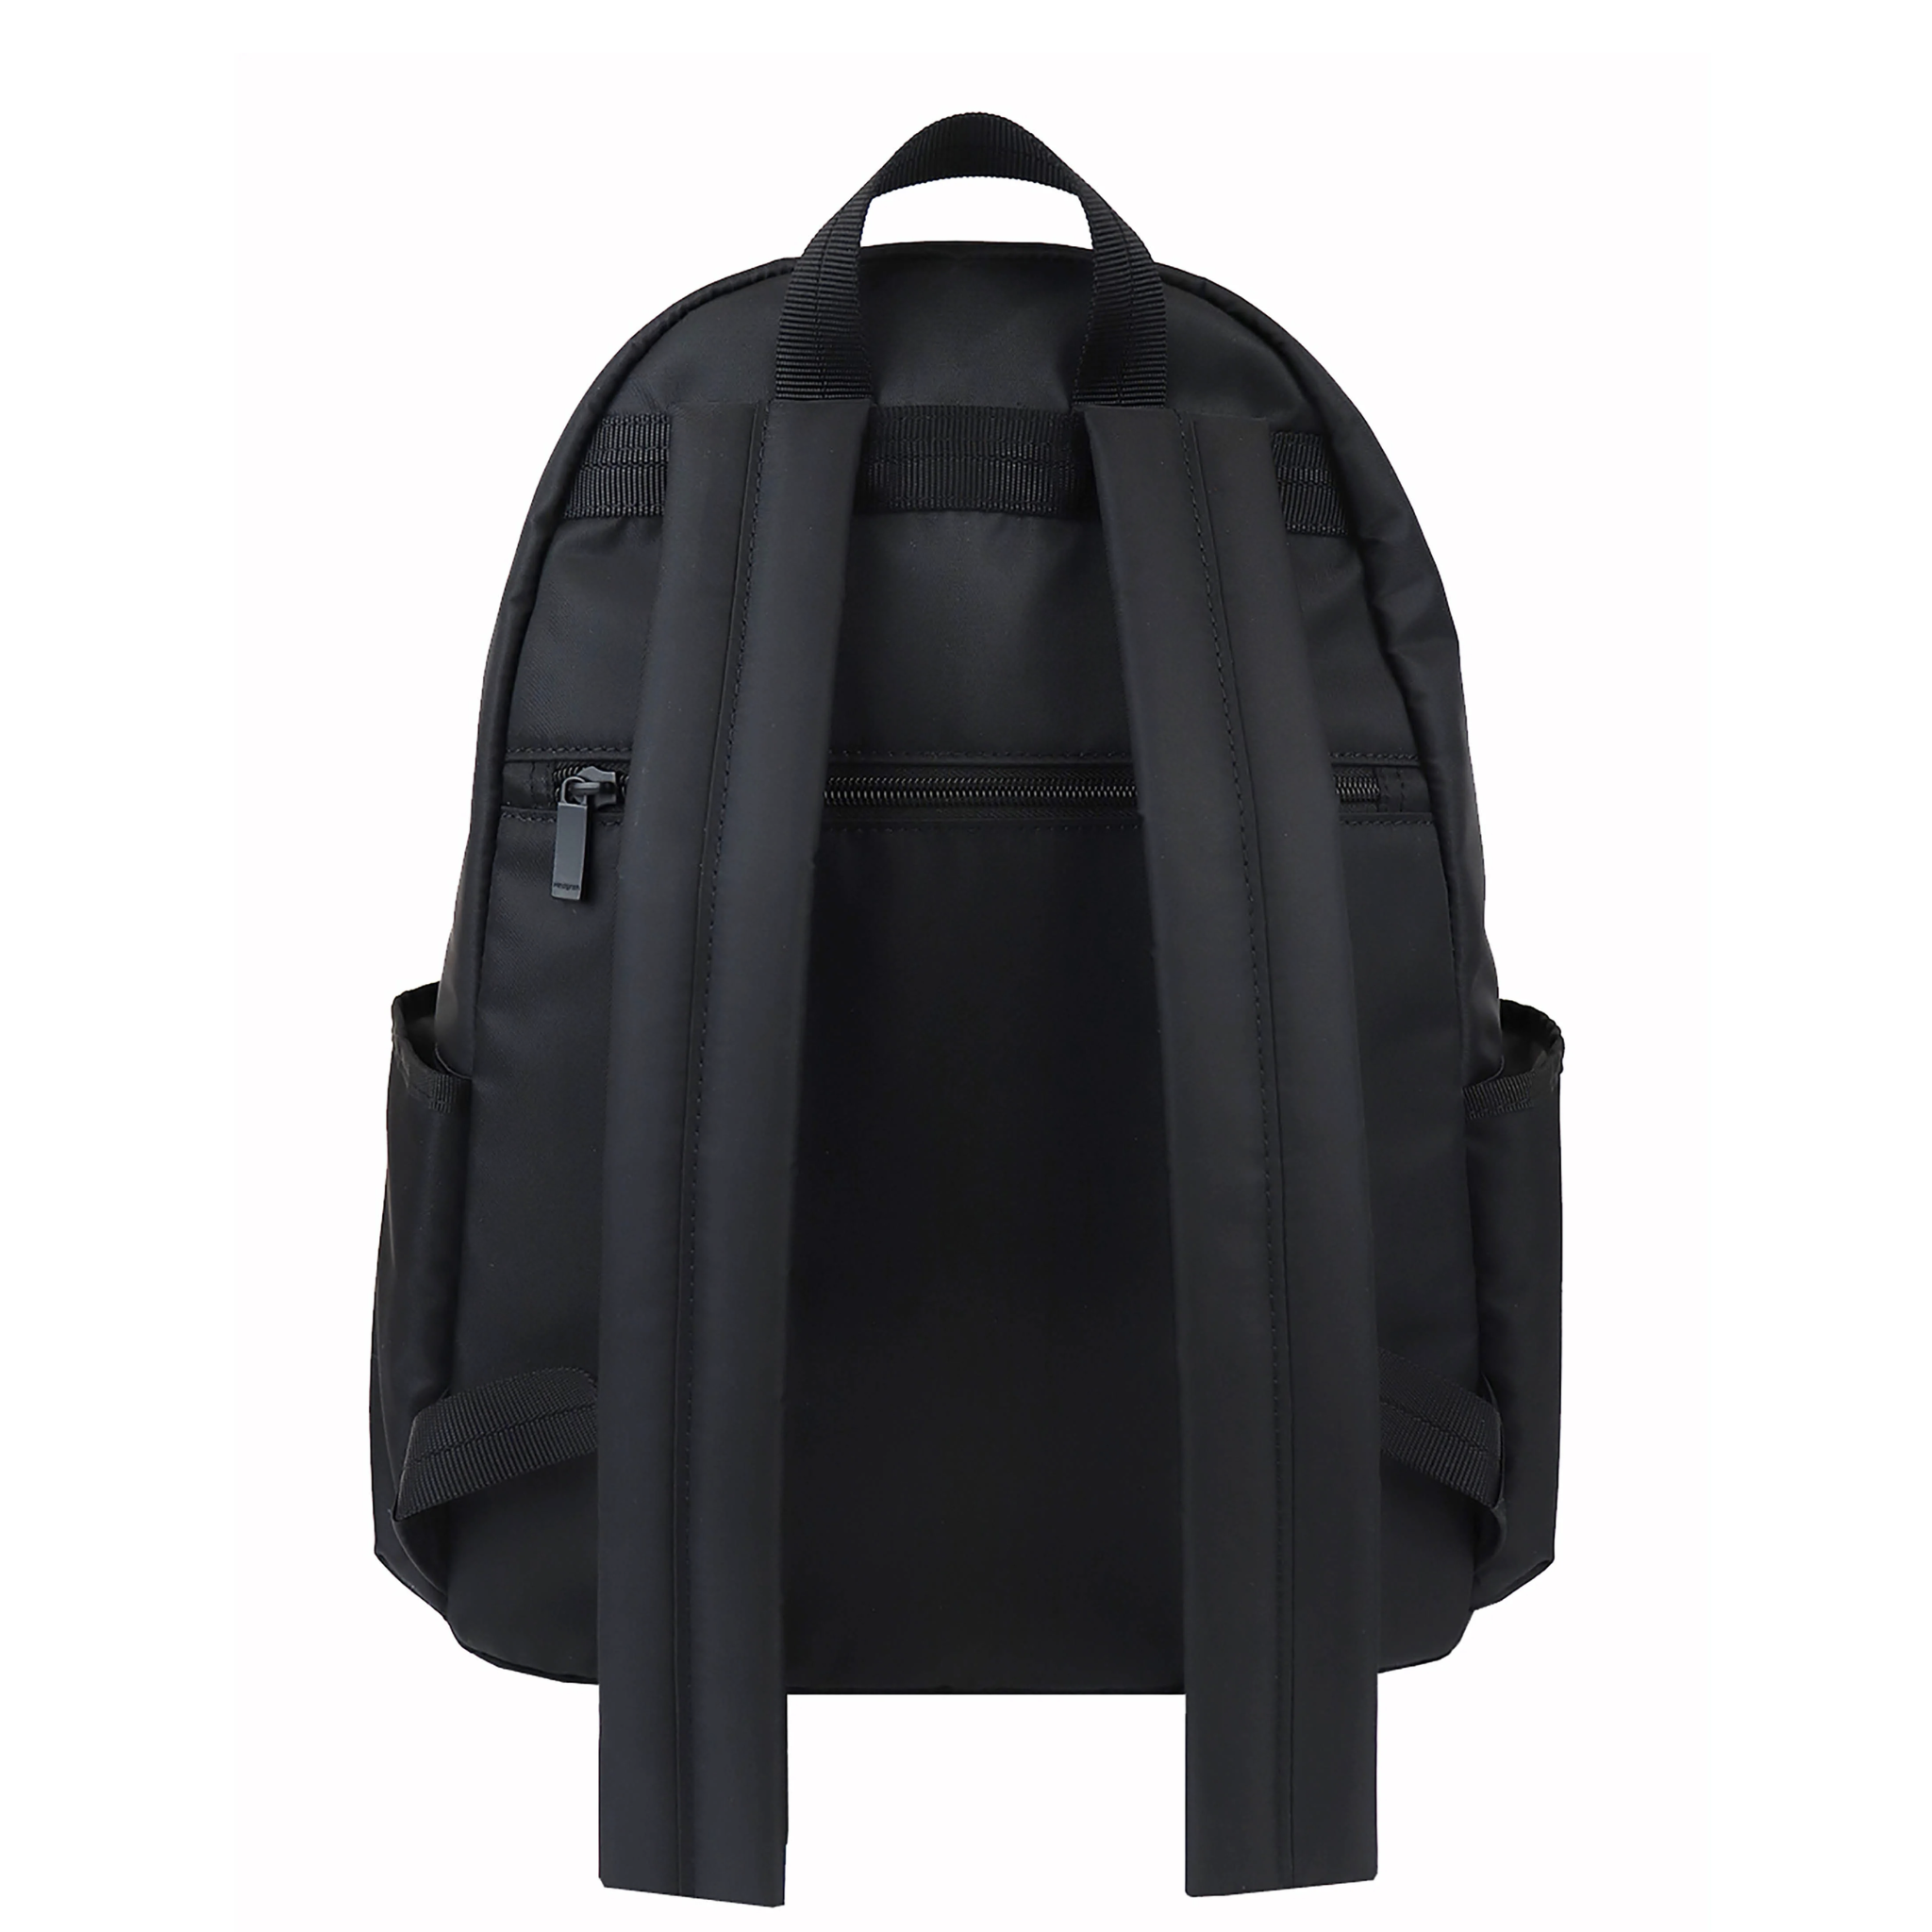 Cibola 2 in 1 Sustainably Made Backpack